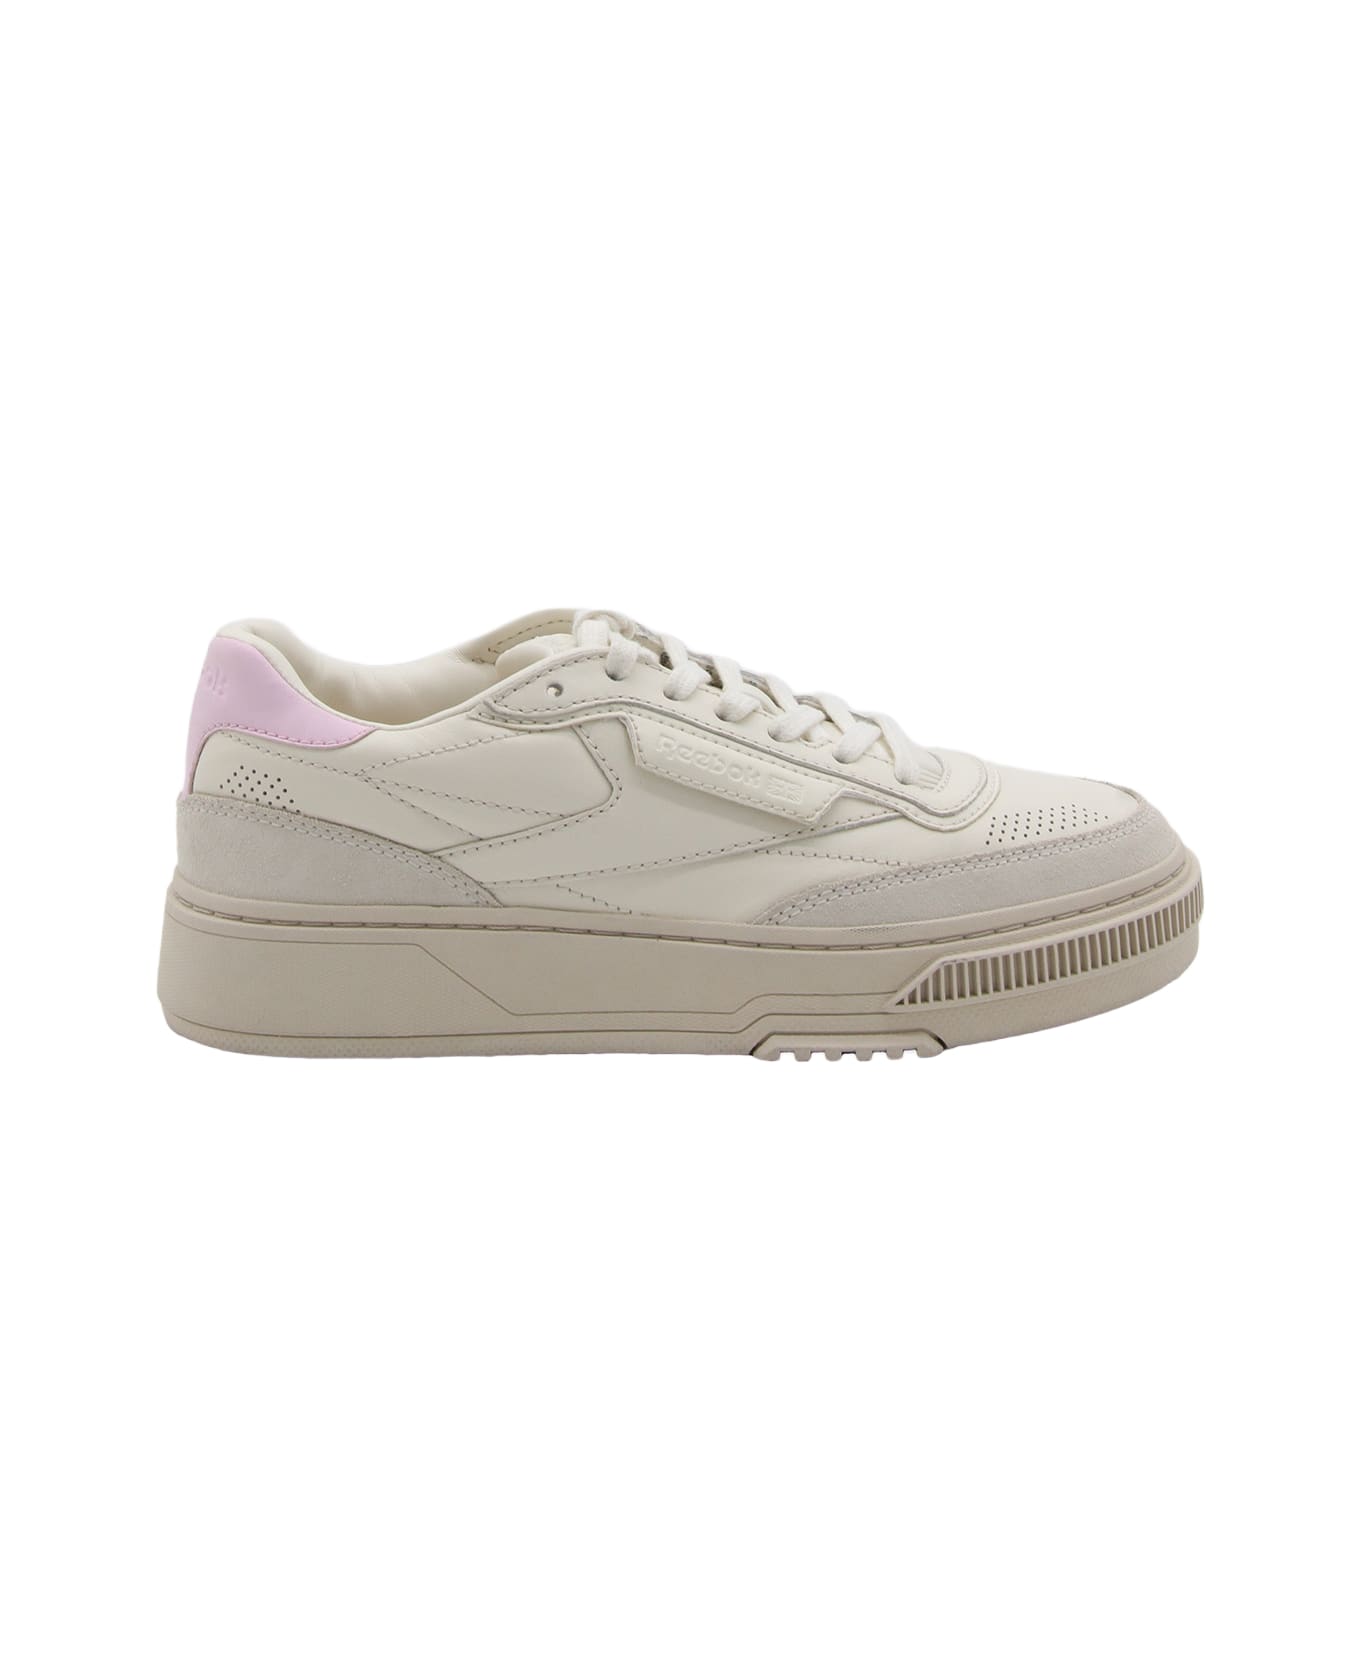 Reebok White And Pink Leather C Ltd Sneakers - WHITE/PINK スニーカー